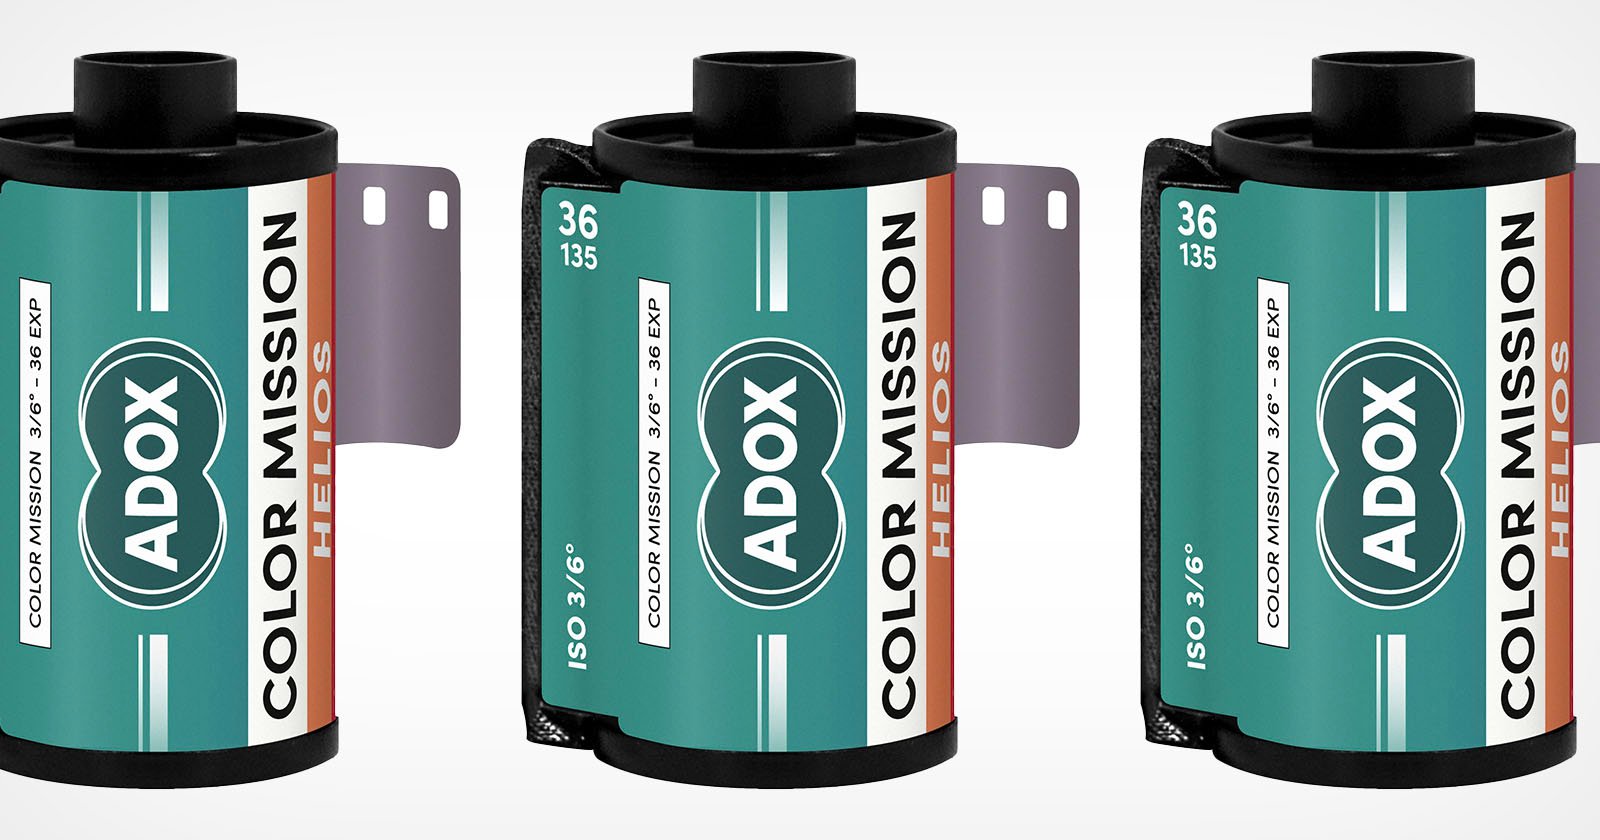  adox launches ultra-low-iso film 